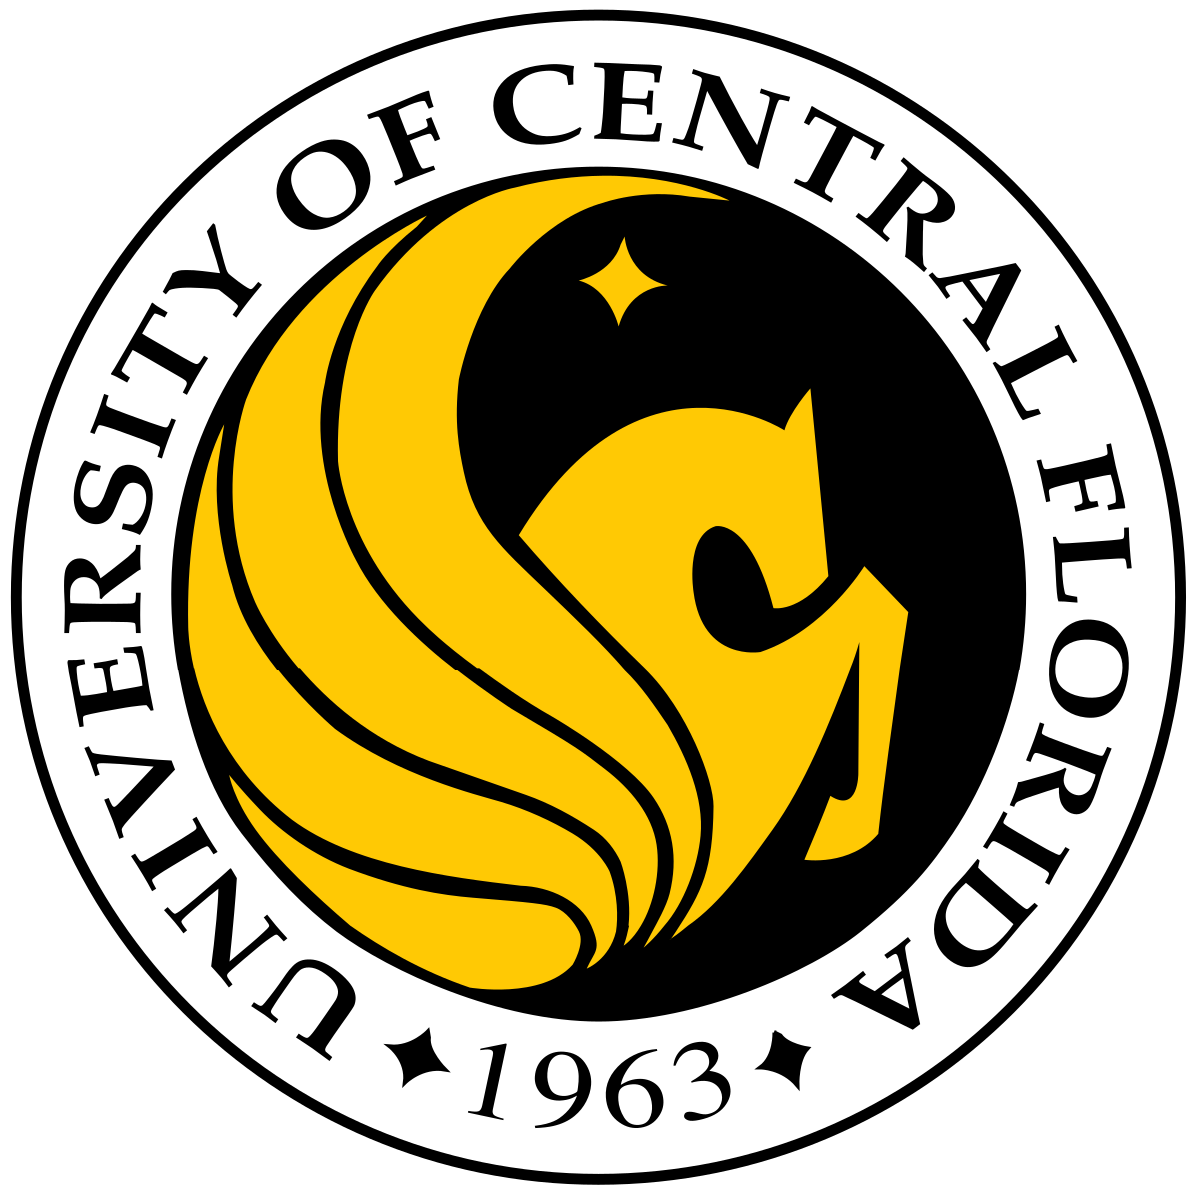 R UCF - A Community For UCF Students, Faculty, And Staff